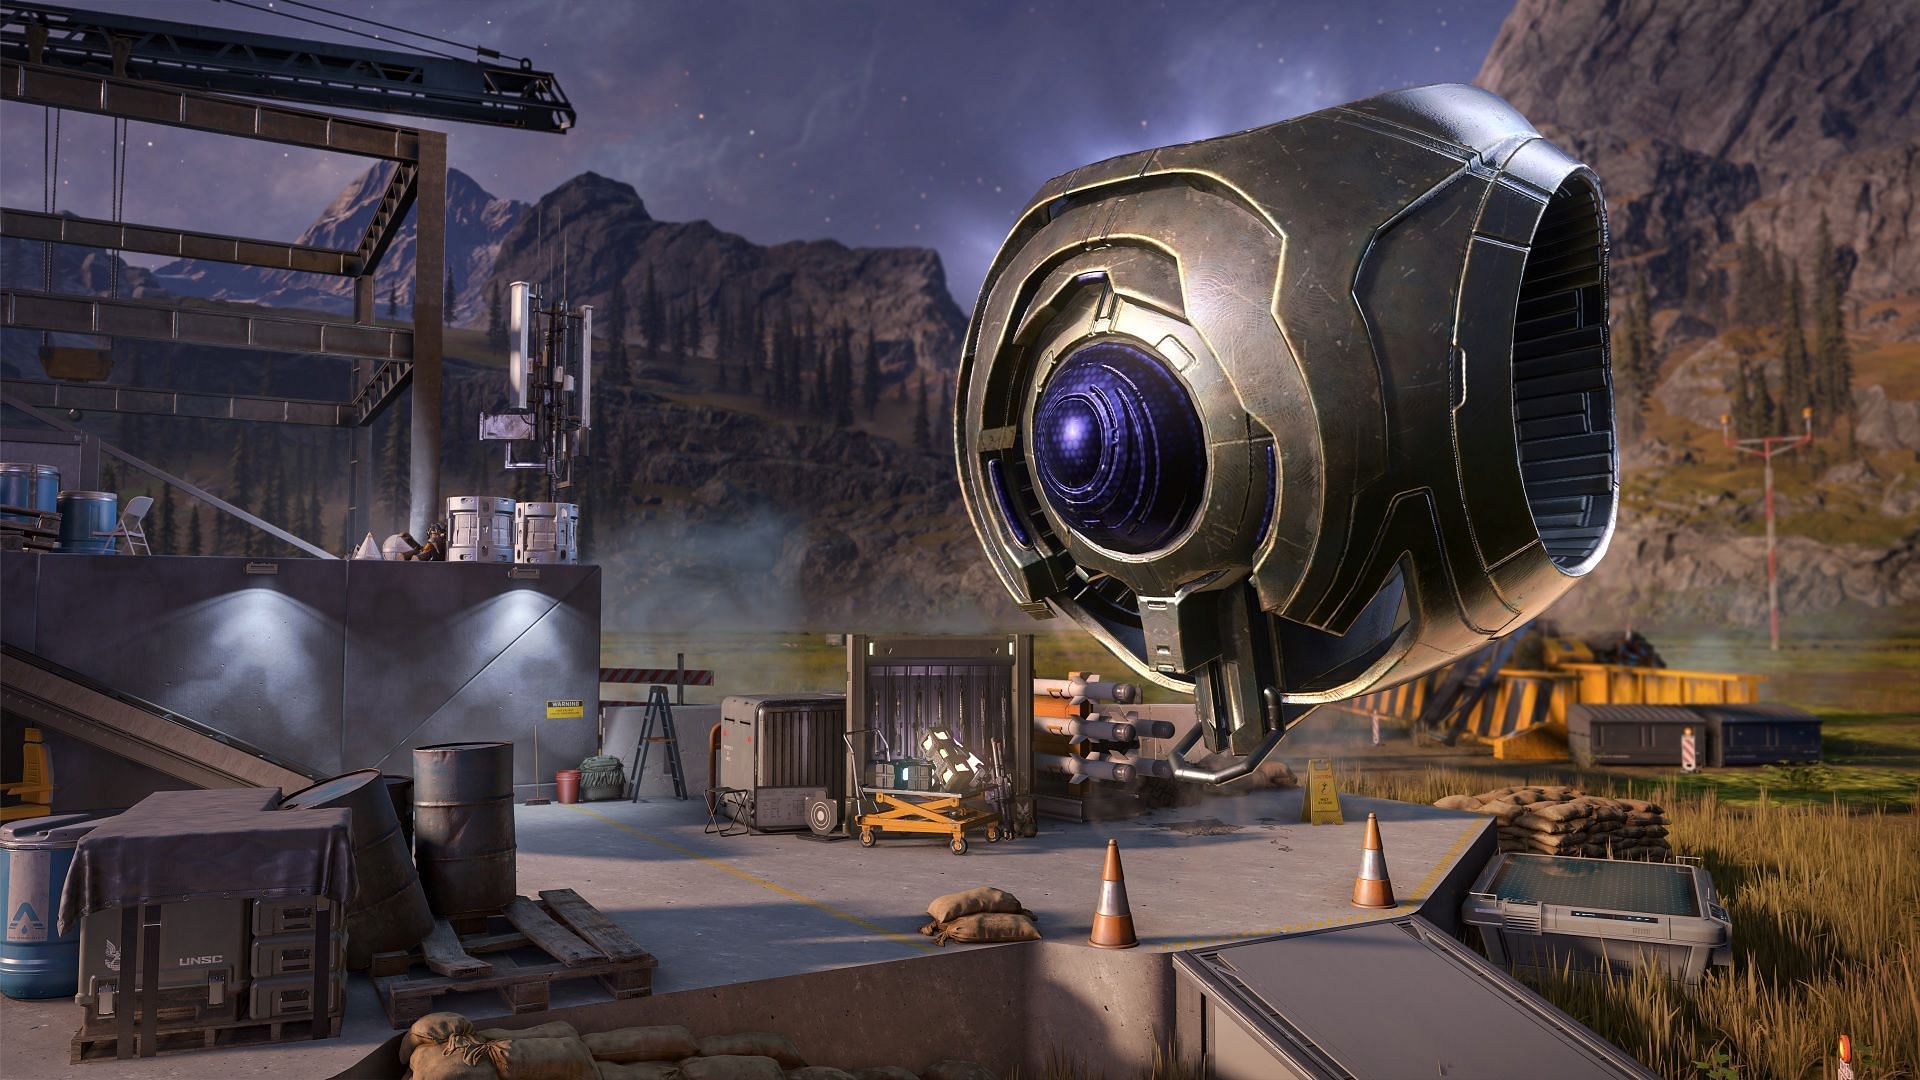 Forge mode returns in the latest Halo title (Image via Microsoft)